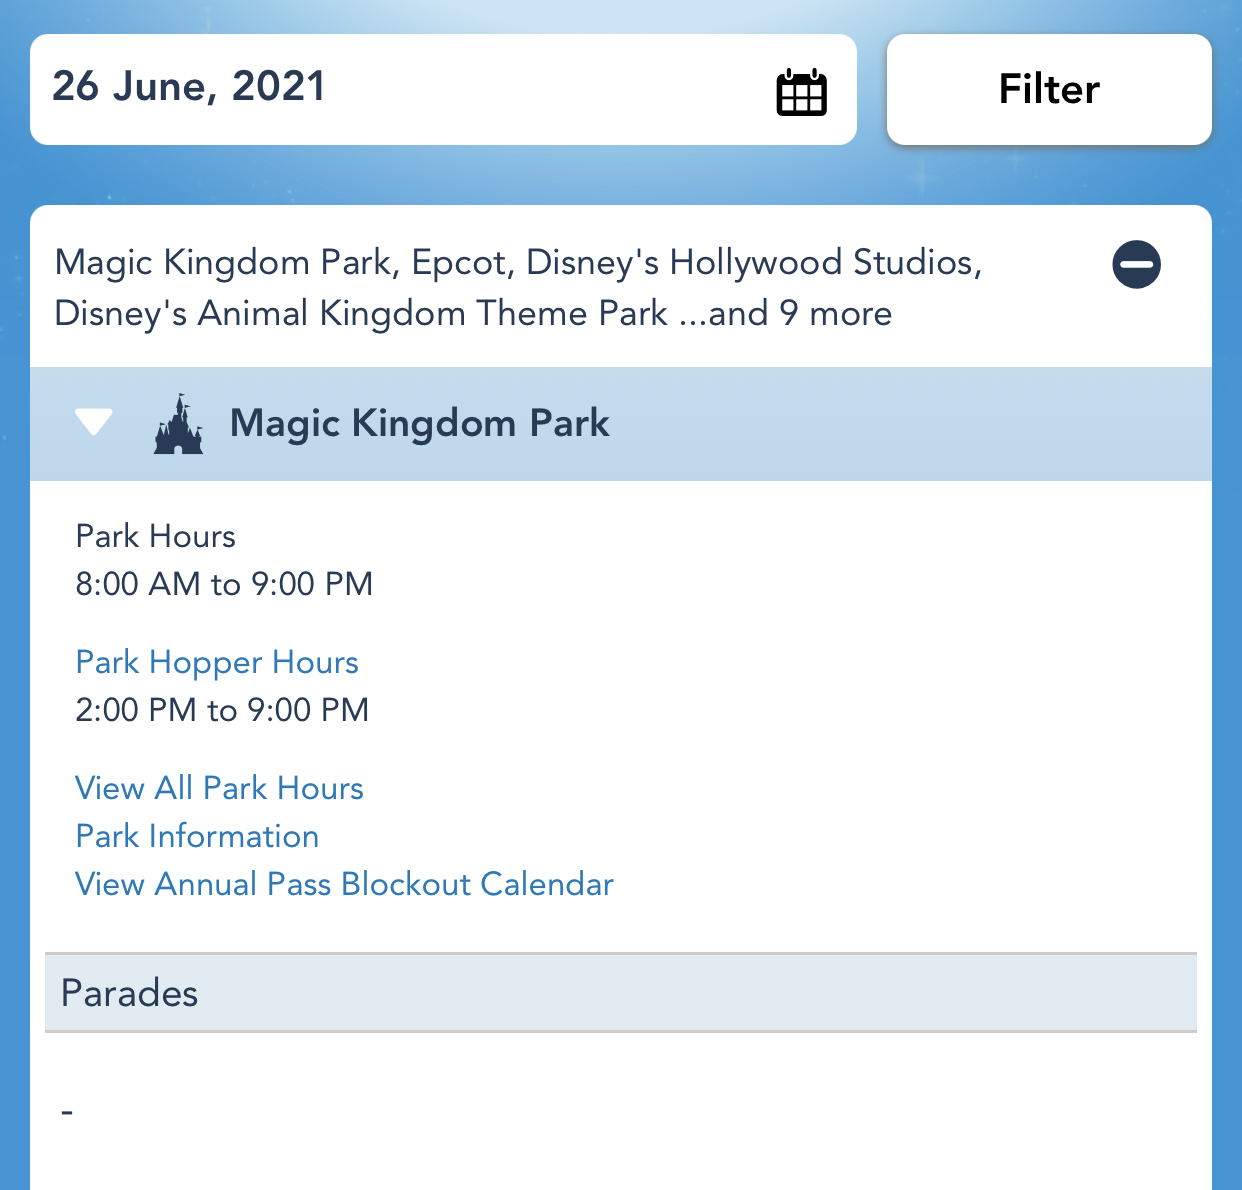 Disney World Theme Park Hours have been released through June 26th